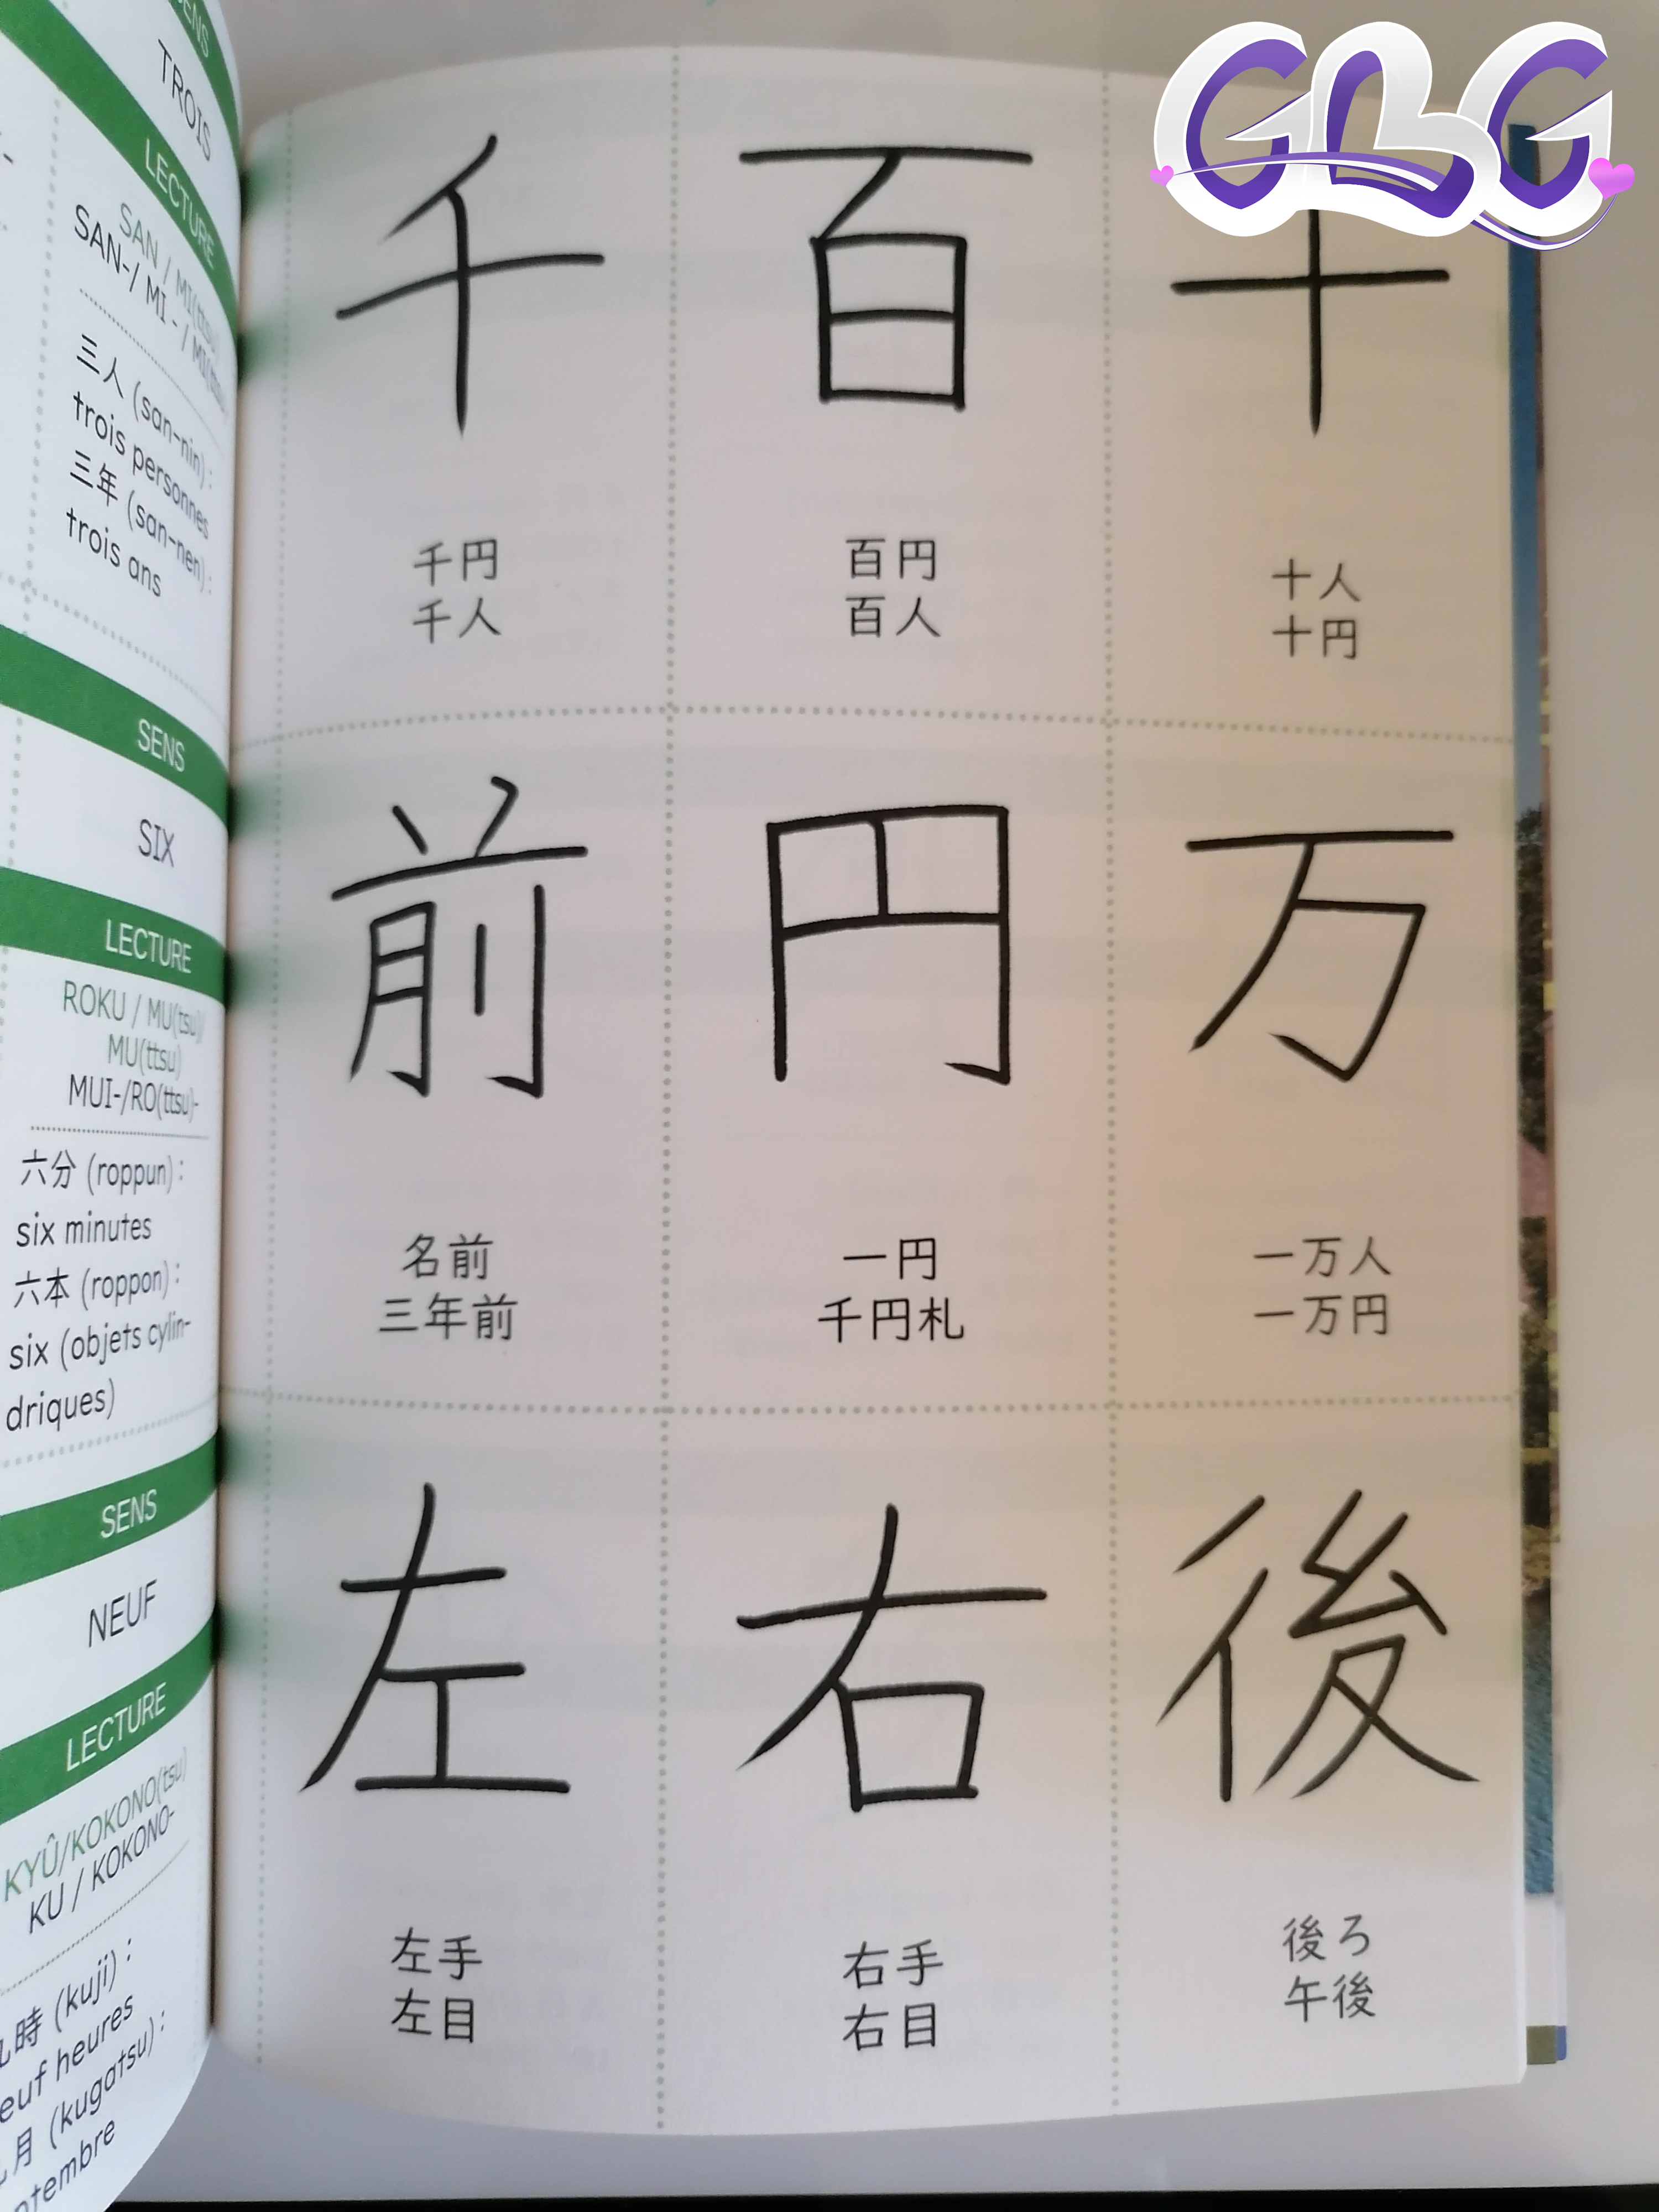 Exemple d'une page kanji "cards"